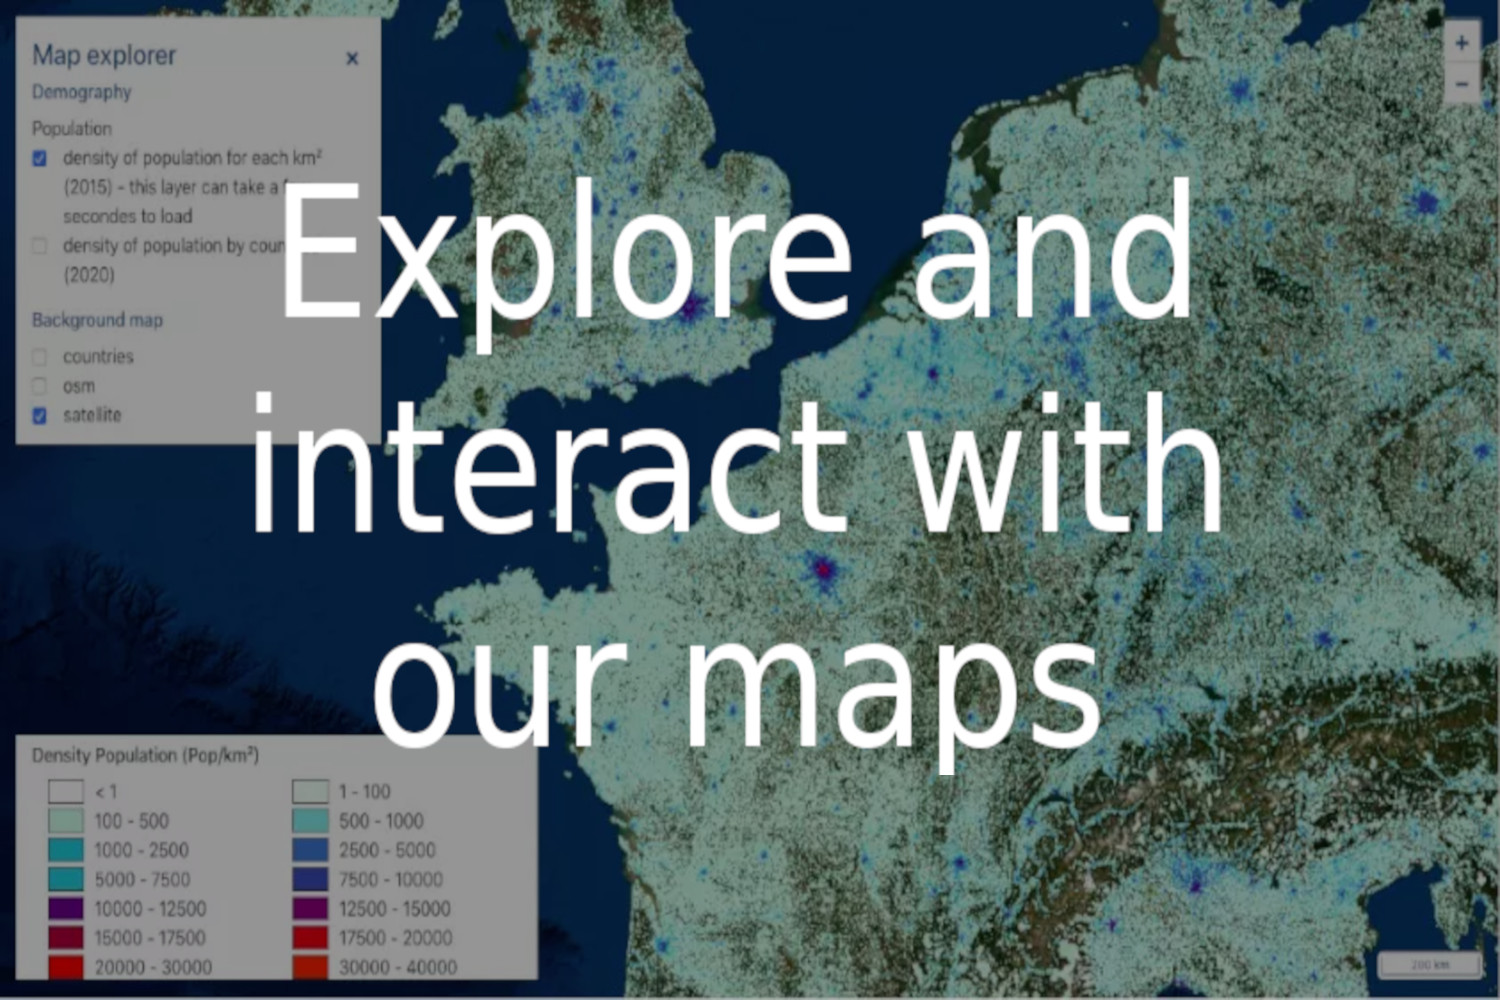 Explore and interact with our maps